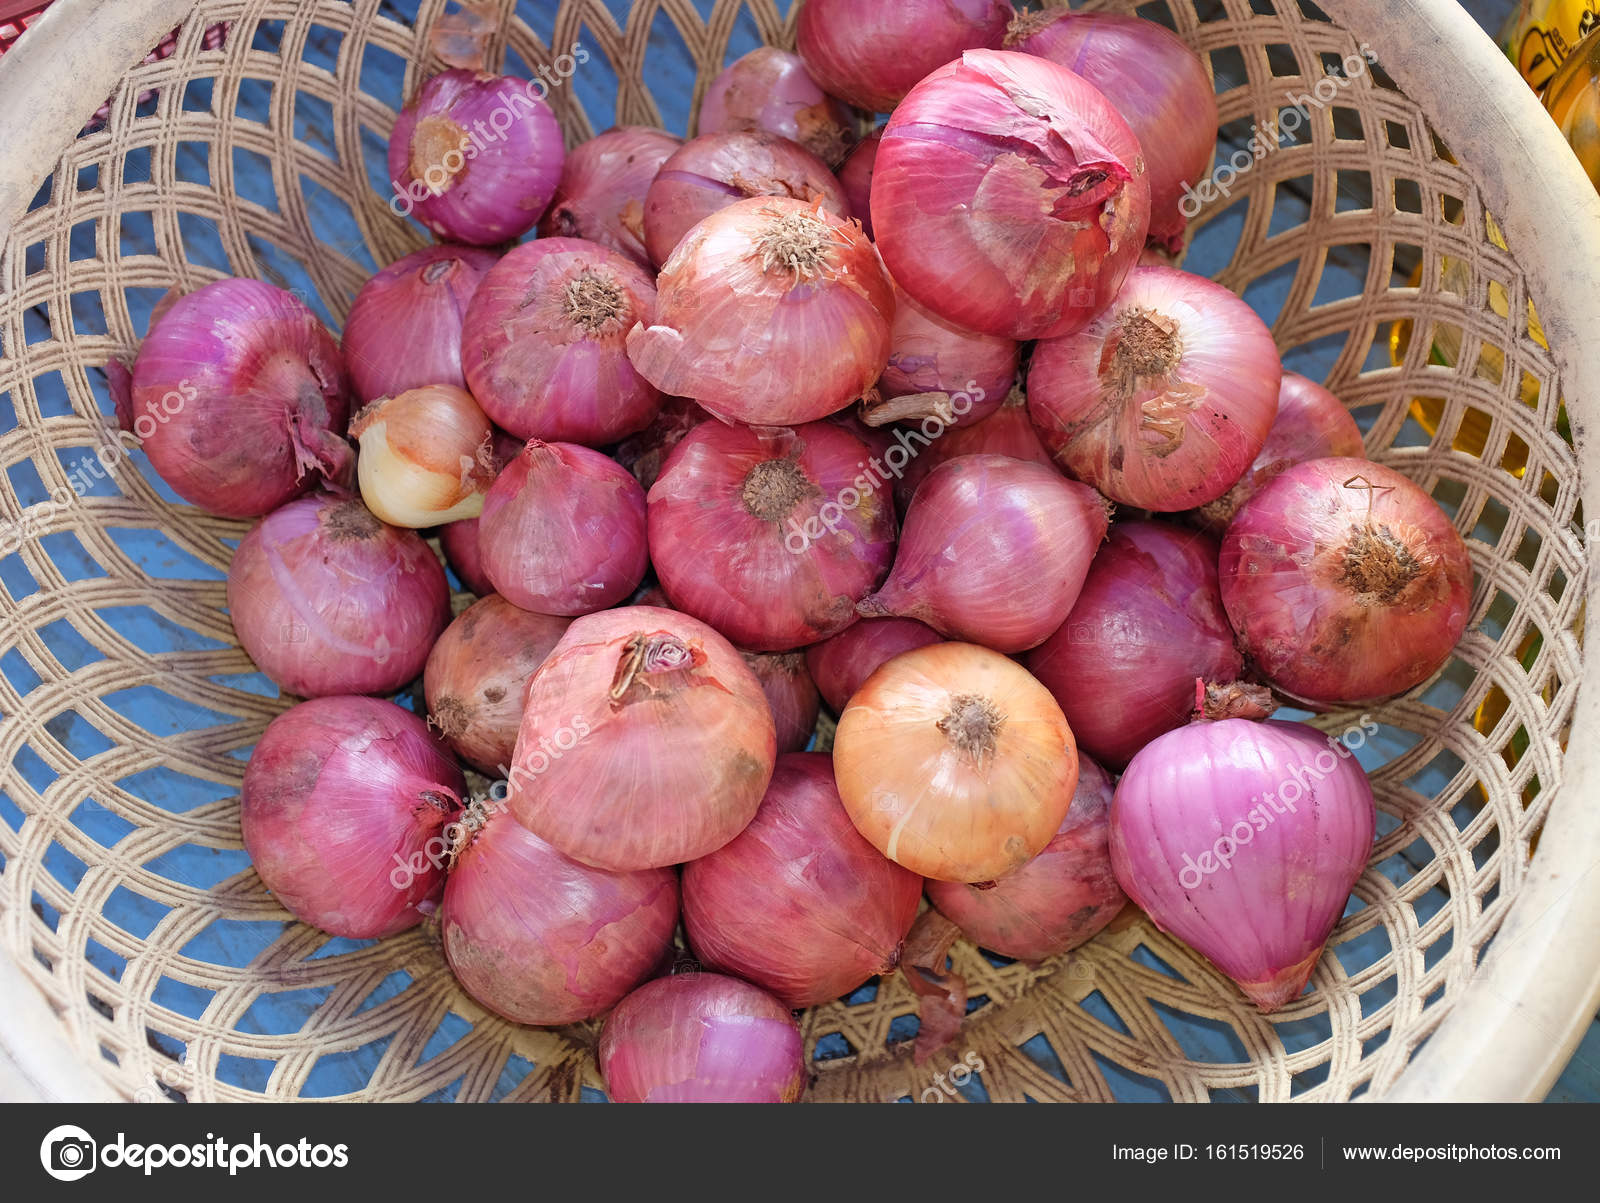 Red Onions in basket — Stock Photo © civic_dm@hotmail.com #161519526